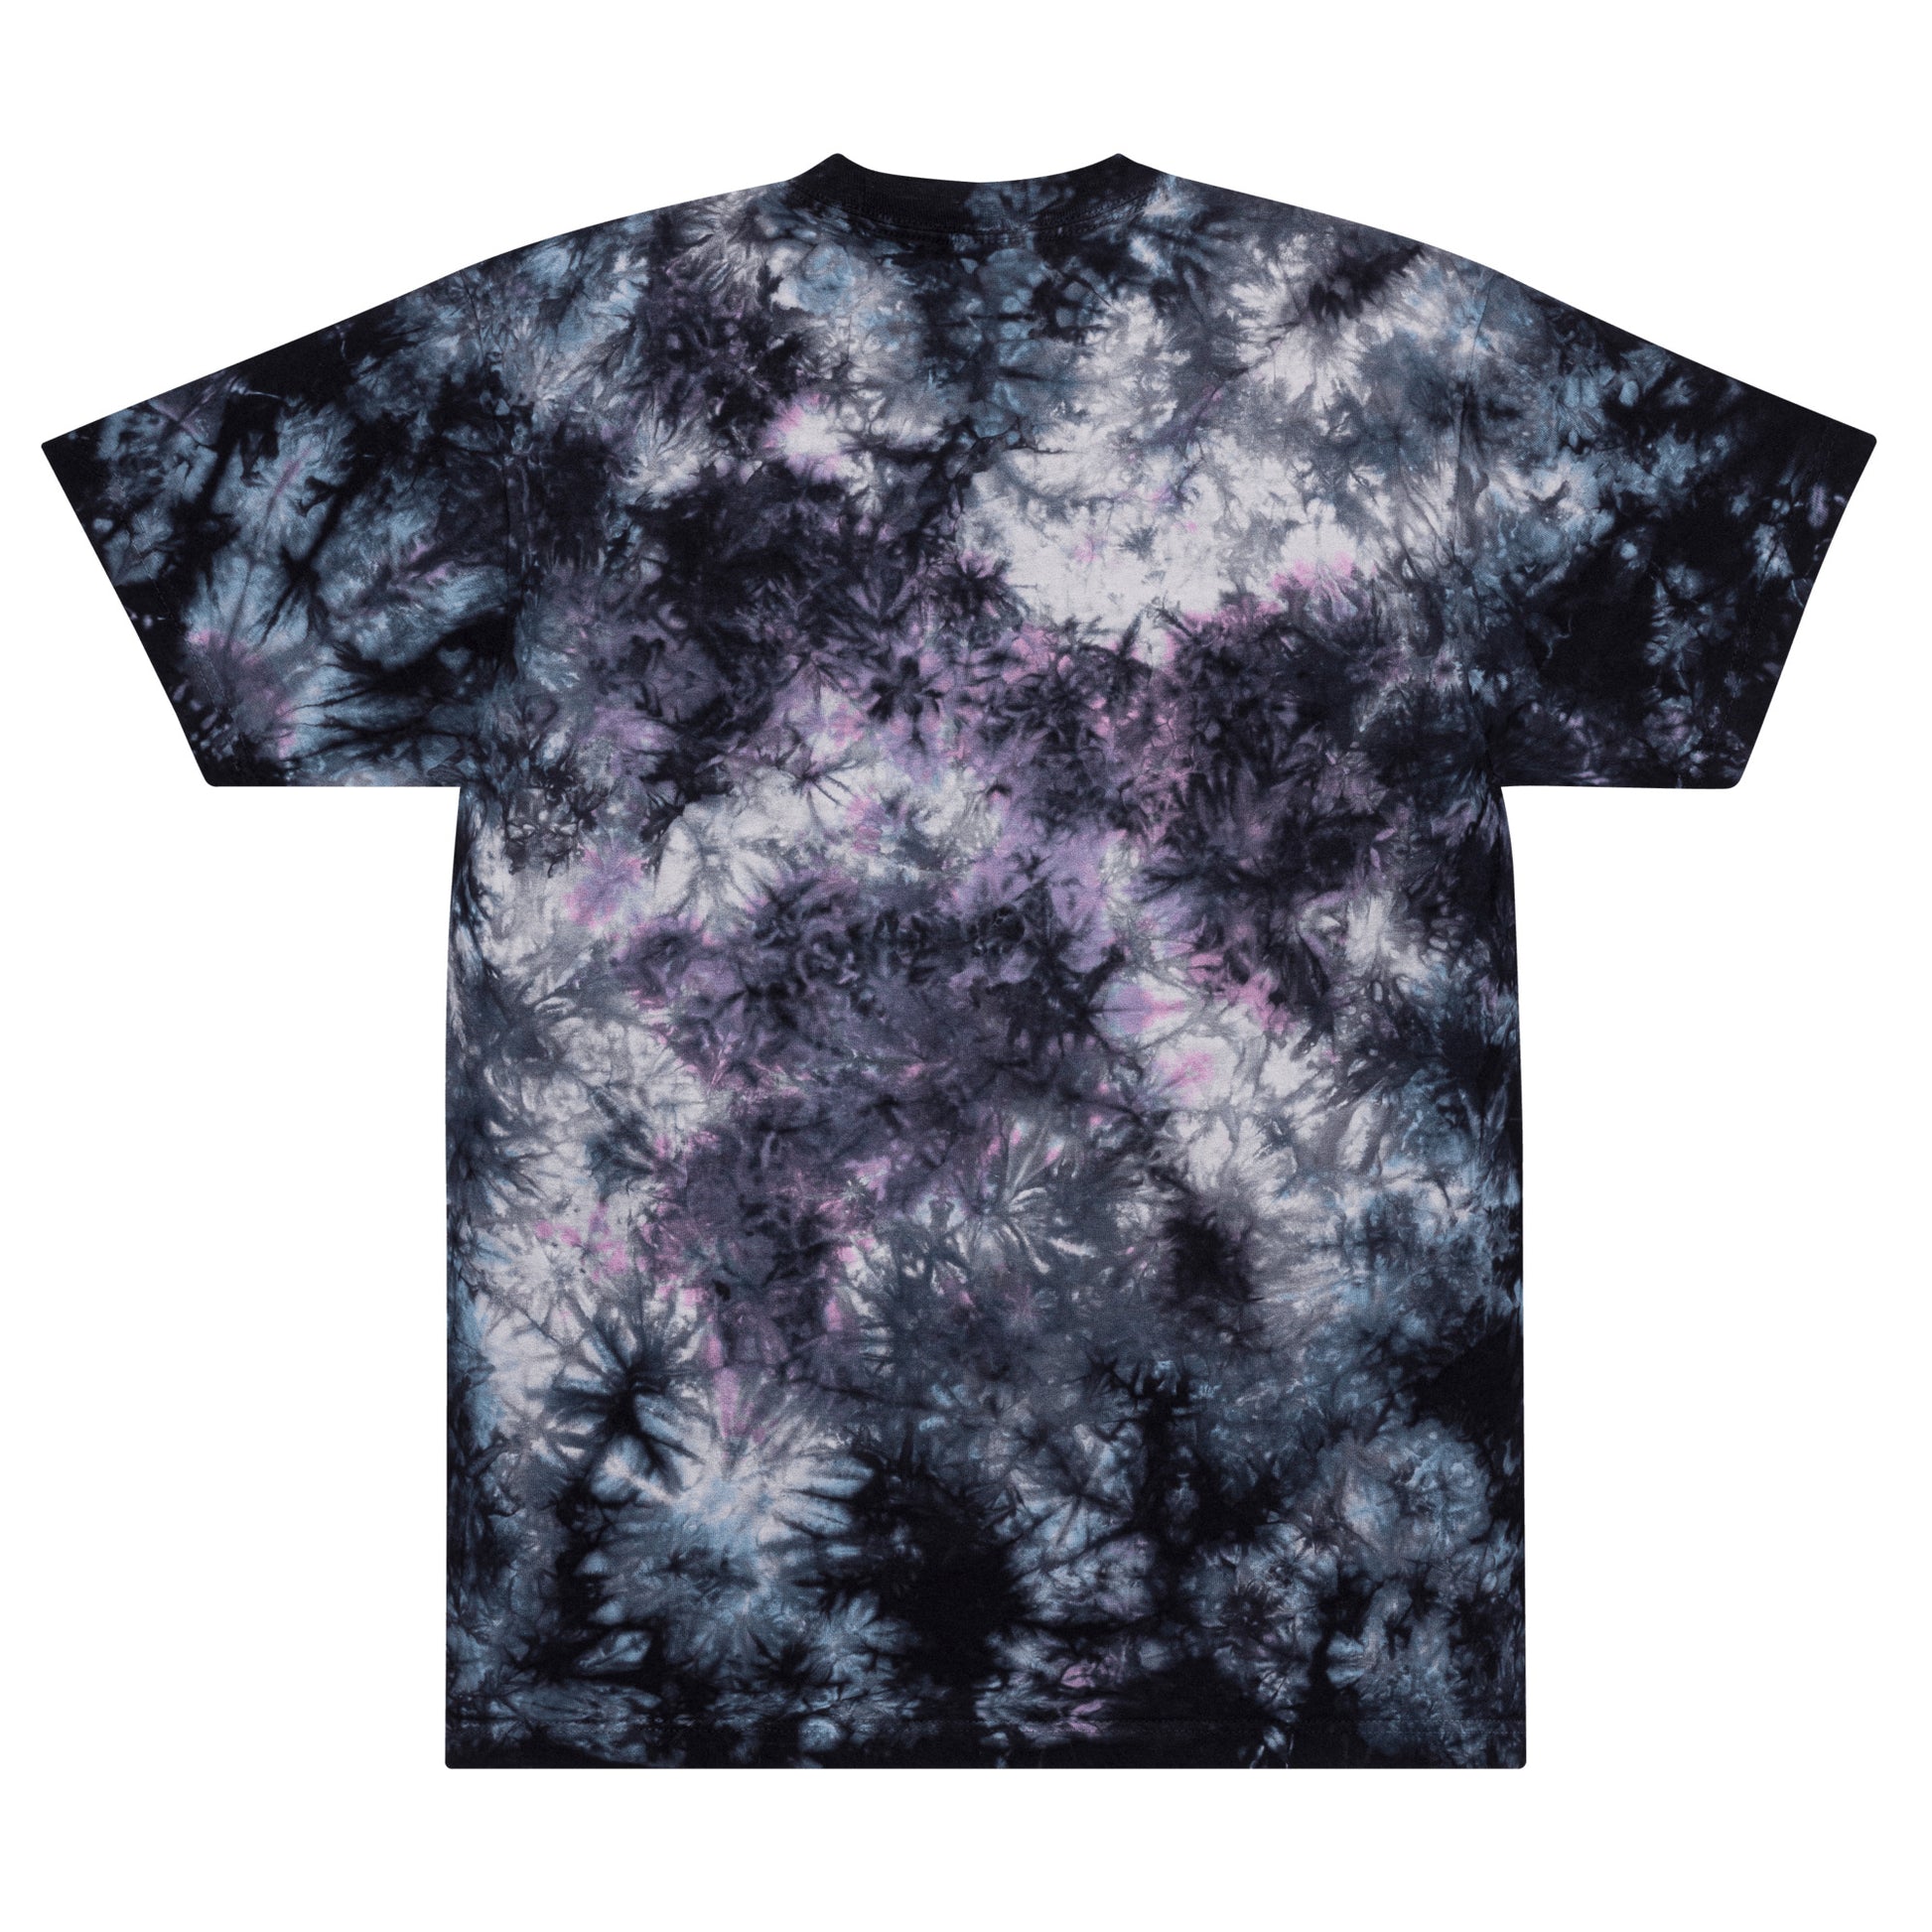 Dibs on the Shadow Daddy Embroidered Oversized tie-dye t-shirt - Quill & Cauldron